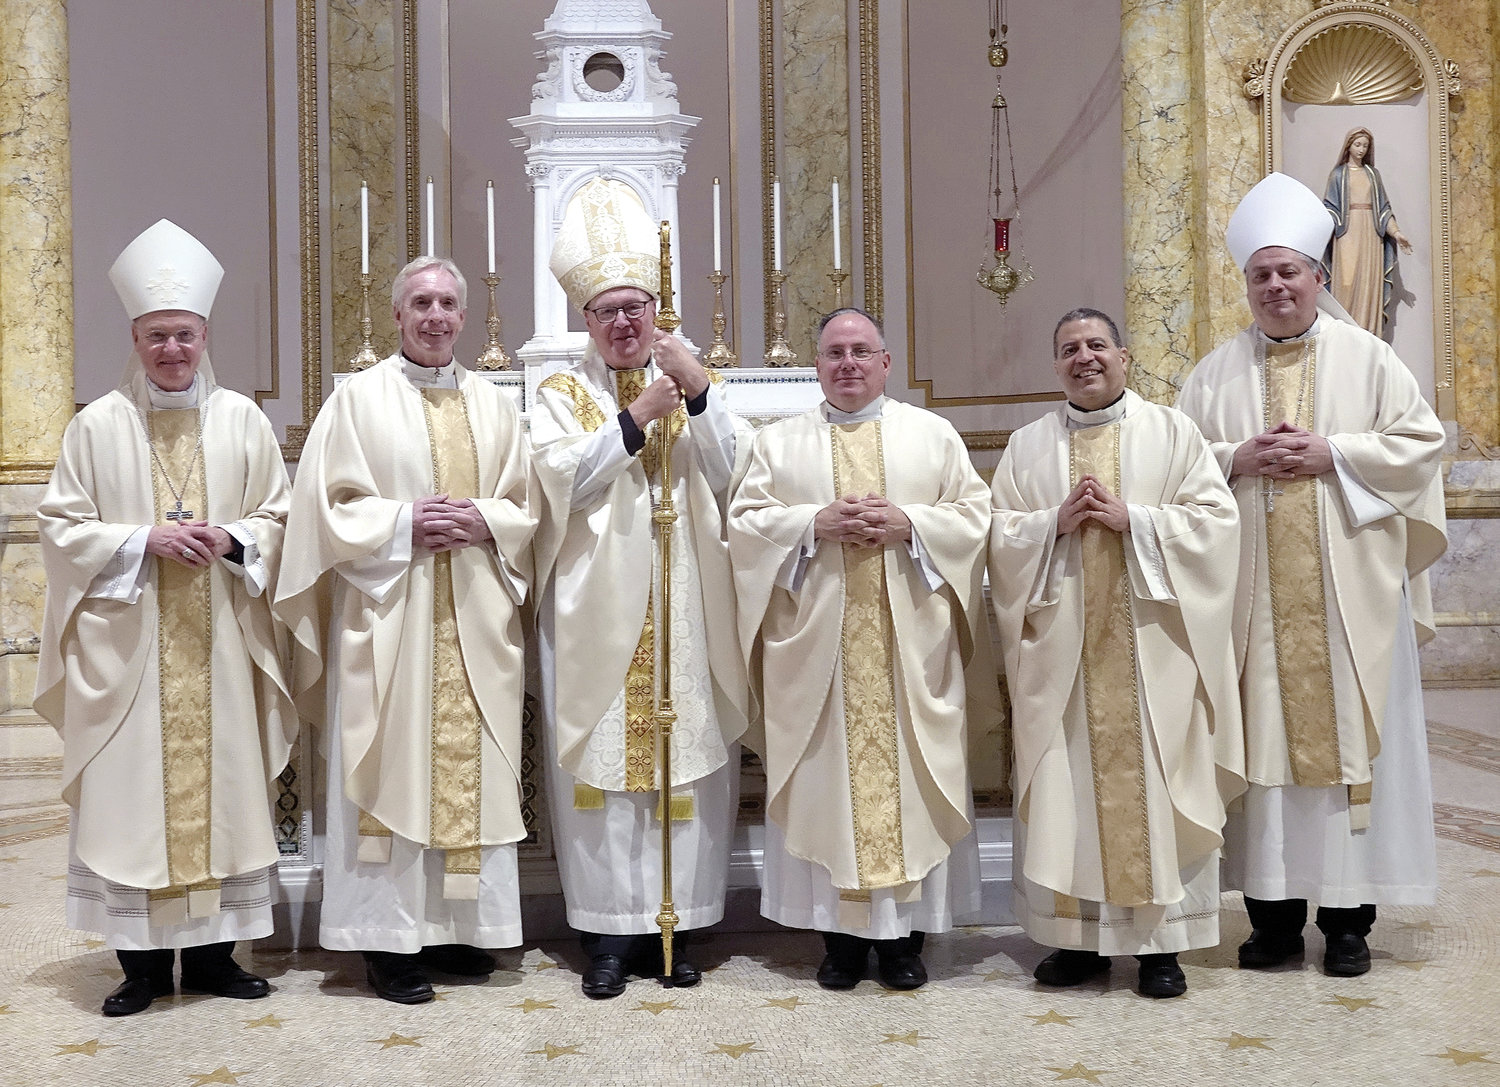 SILVER JUBILARIANS–Members of the Ordination Class of 1997 join Auxiliary Bishop Edmund Whalen, left; Cardinal Dolan and Auxiliary Bishop John Bonnici, right. Marking their jubilees are, from left: Father Robert Dillon, Father Michael Martine and Father Ambiorix Rodriguez.